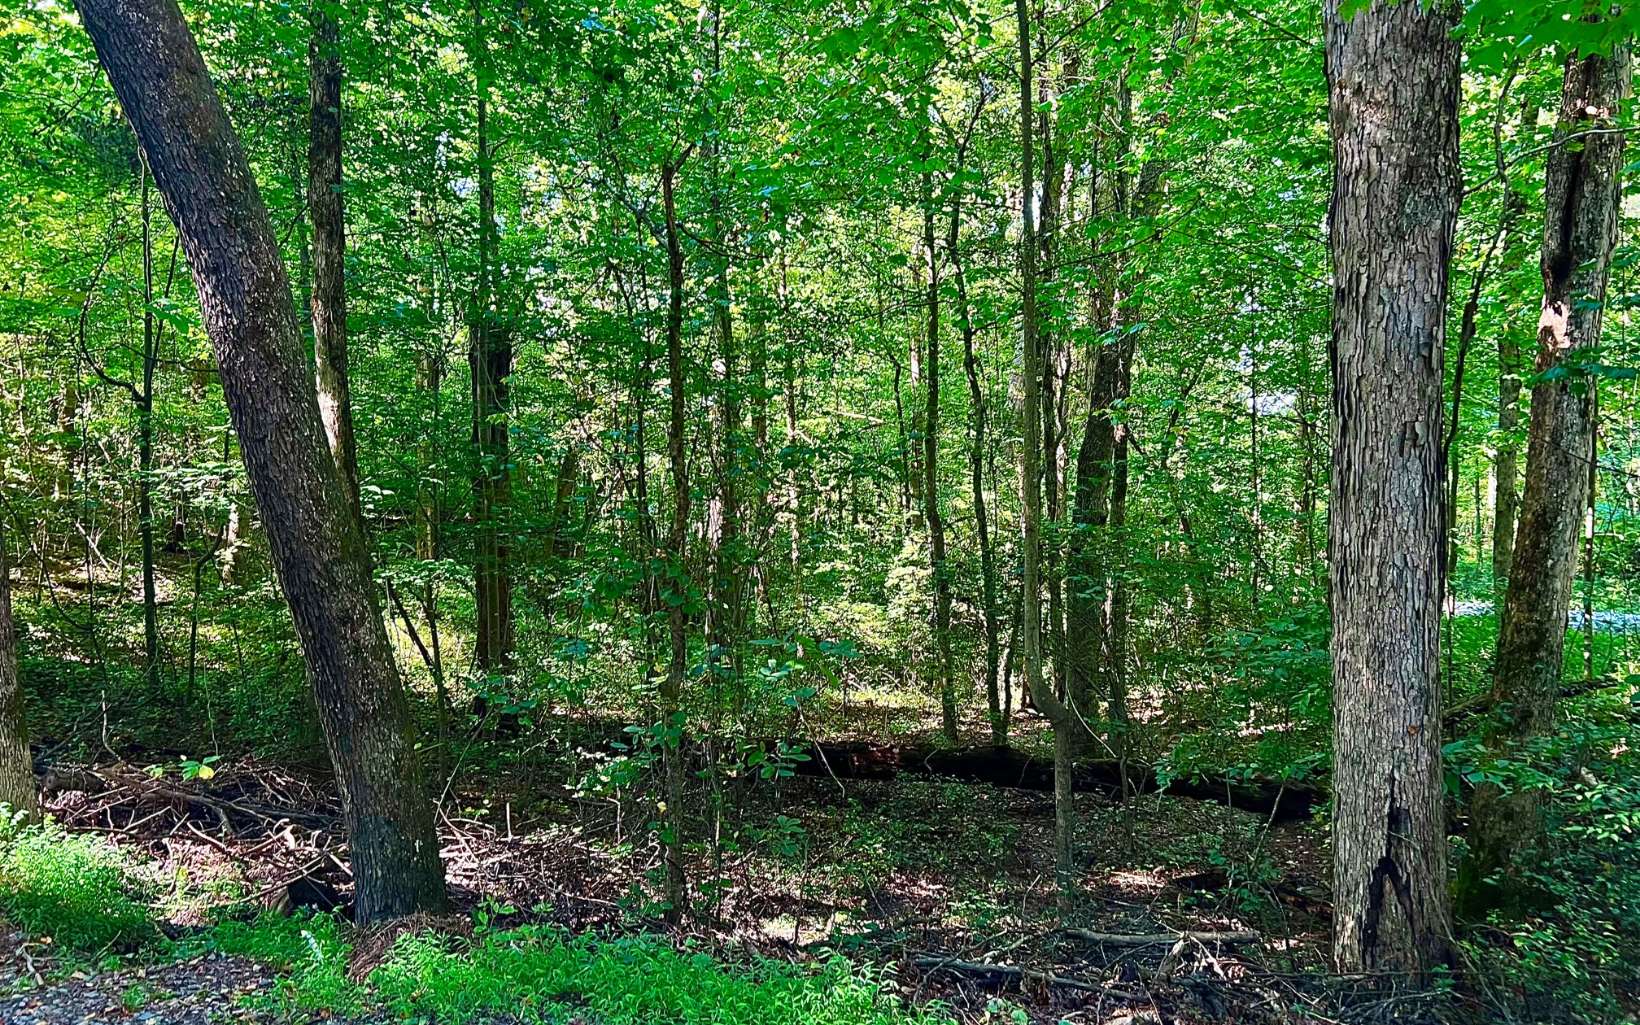 Looking for a BEAUTIFUL and FLAT lot in Ellijay that is less than 10 minutes from Downtown Ellijay? Look no further! This beautiful lot is ready for you to come and build now! County Water available, Great cell service, High Speed Internet available, Telephone available! Conveniently located near many Apple Orchards and Wineries in Ellijay! Ask for our local builder info and get started today! Mostly unrestricted lot with few restrictions, No mobile homes allowed and minimum of 1,000 sq ft. See links in documents for full C & R. Lot is right across from 59 Lakeview Court, Ellijay GA 30540.